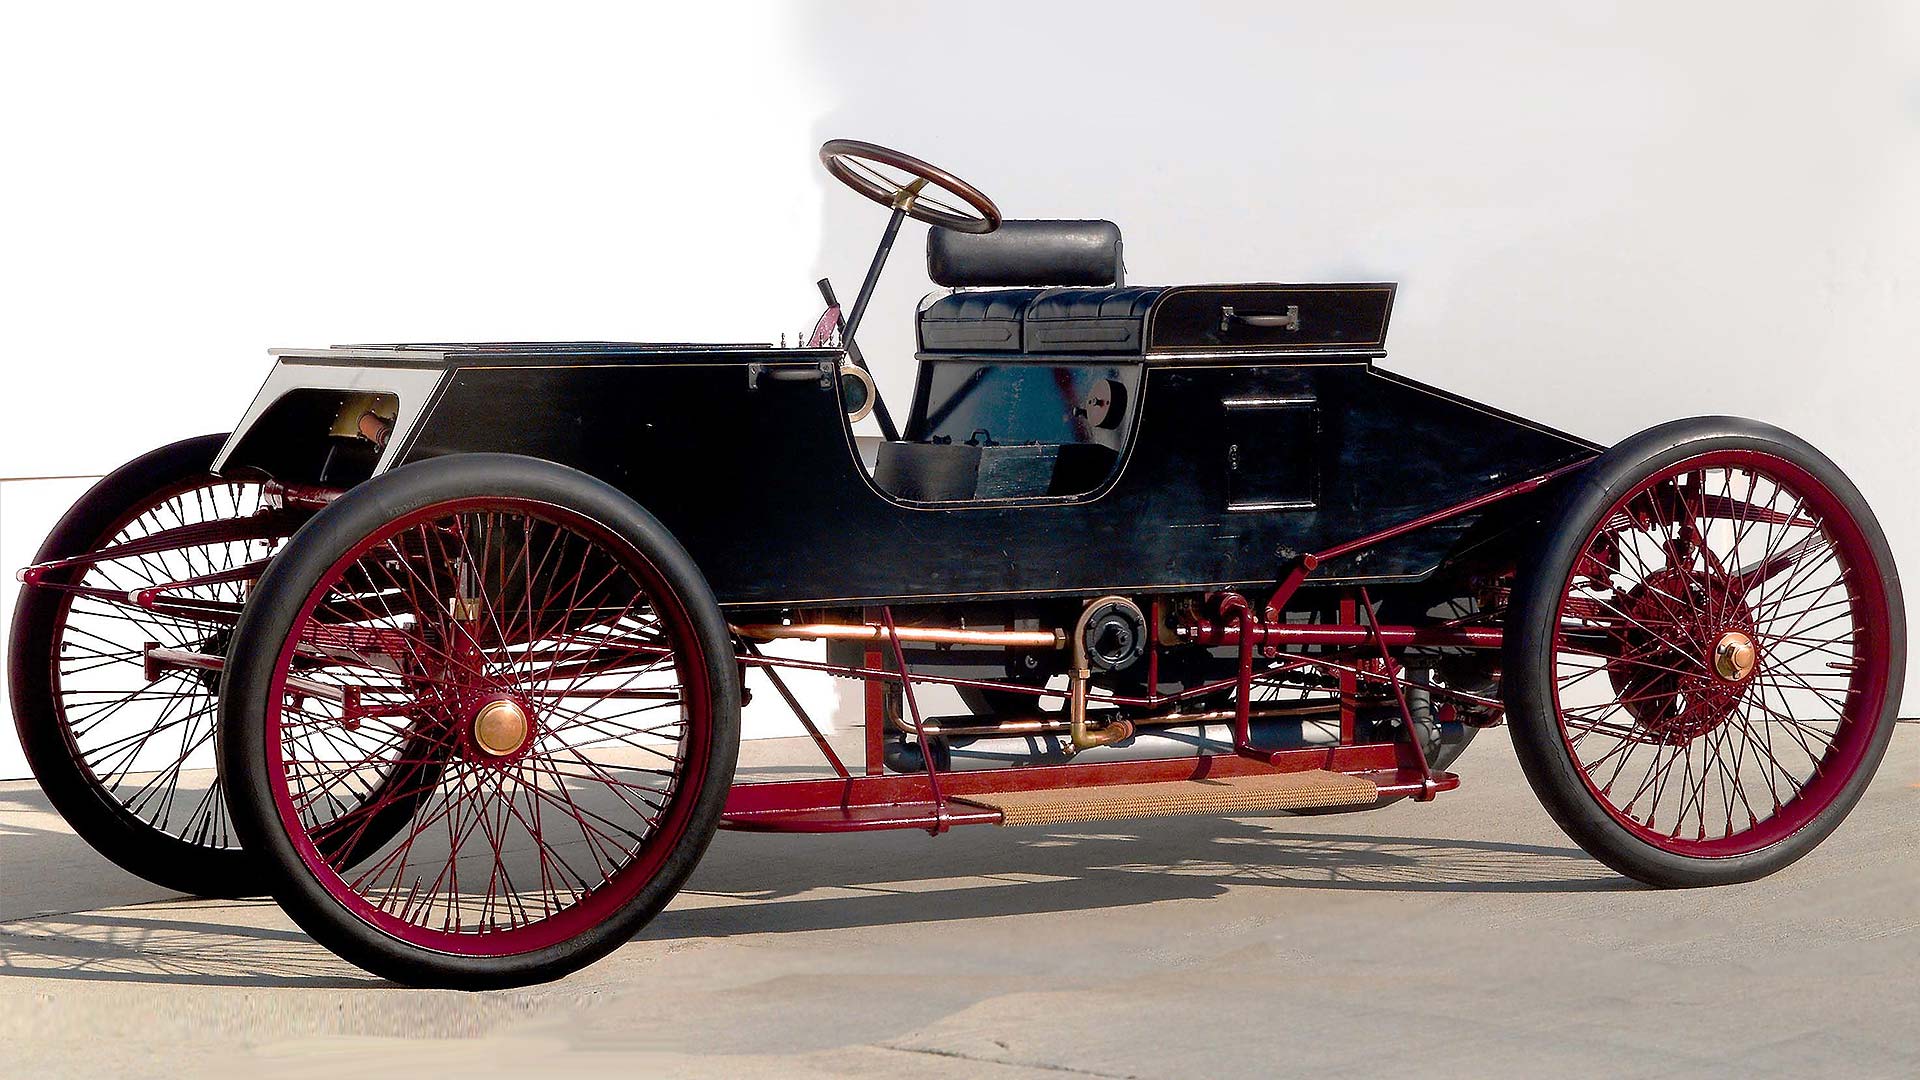 1901 Ford sweepstakes car